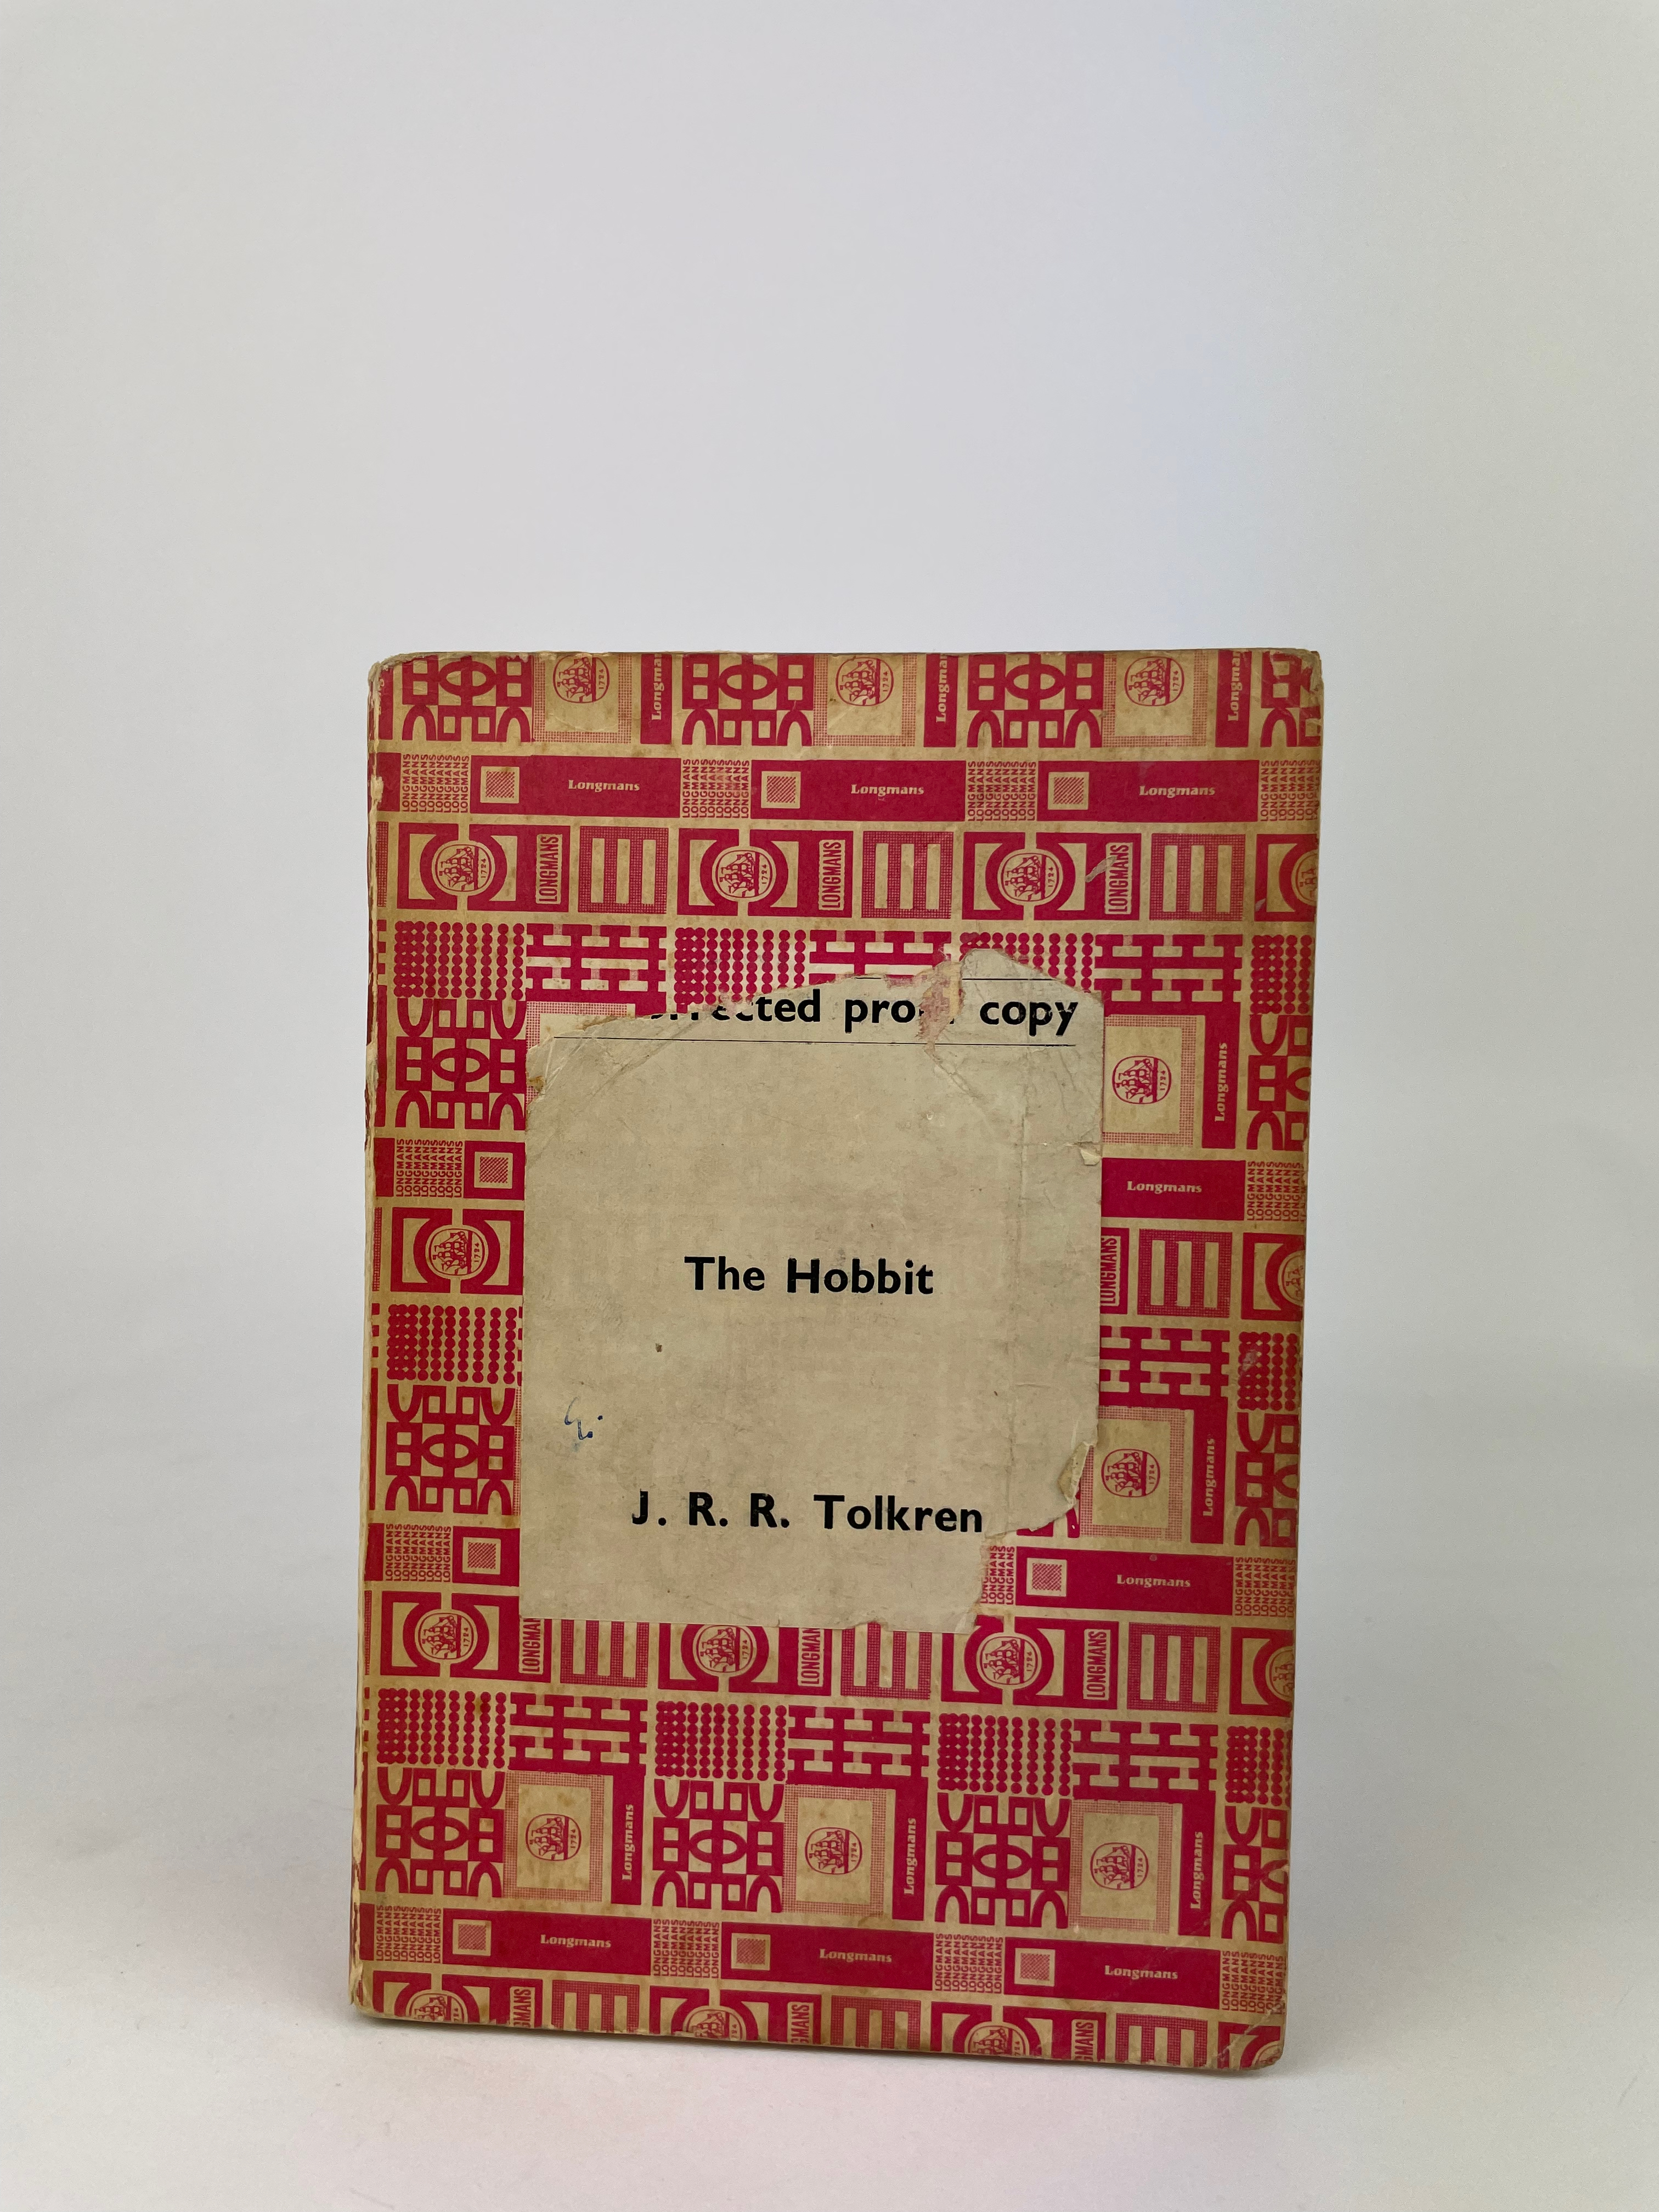 Advance Uncorrected Proof of The Hobbit, Heritage of Literature Edition, Longmans, London